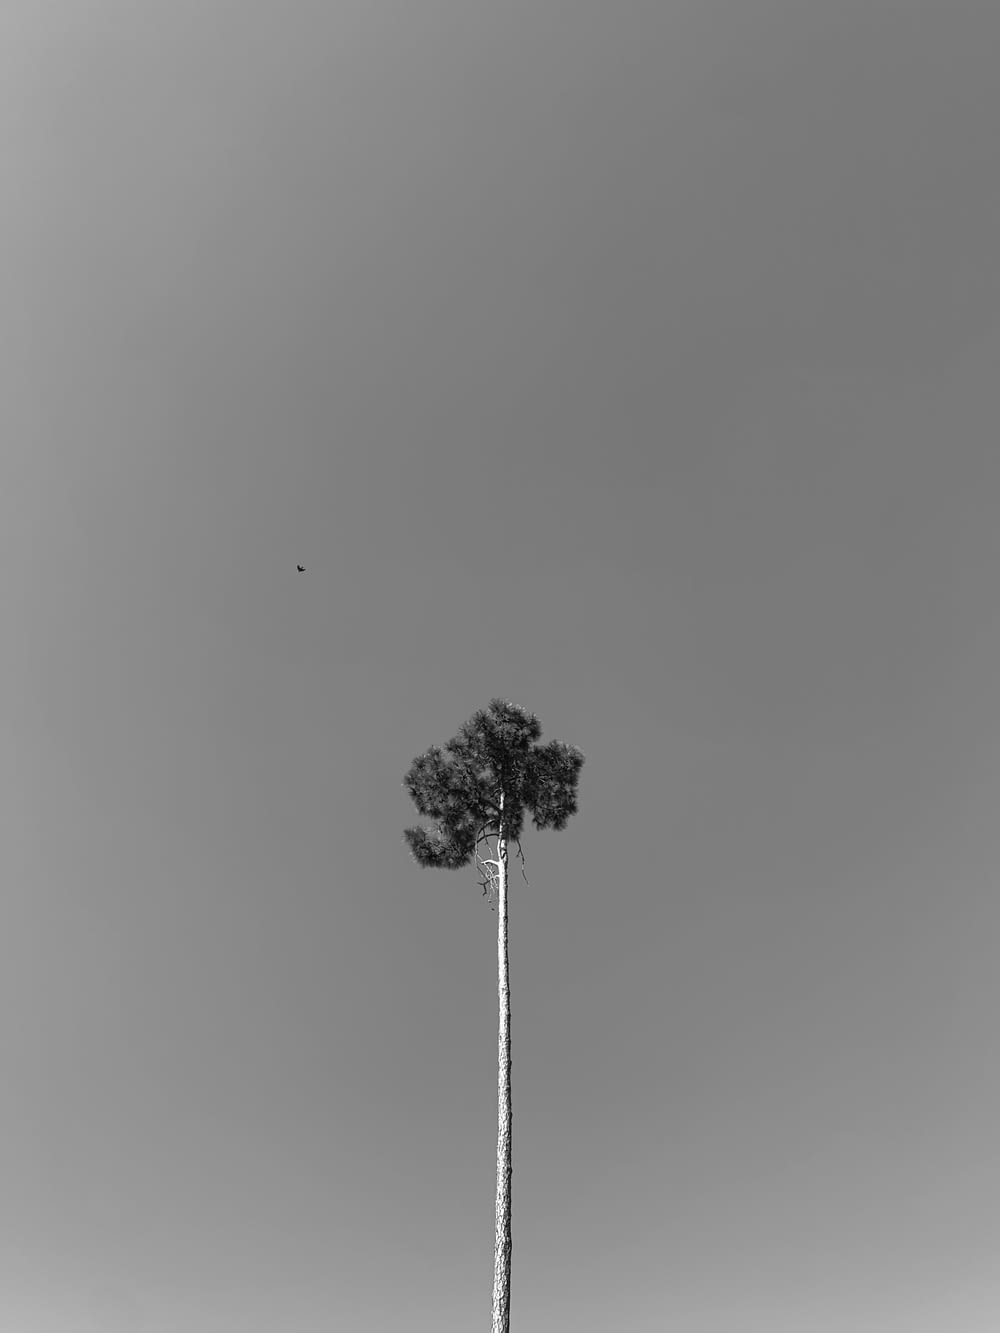 a black and white photo of a single tree